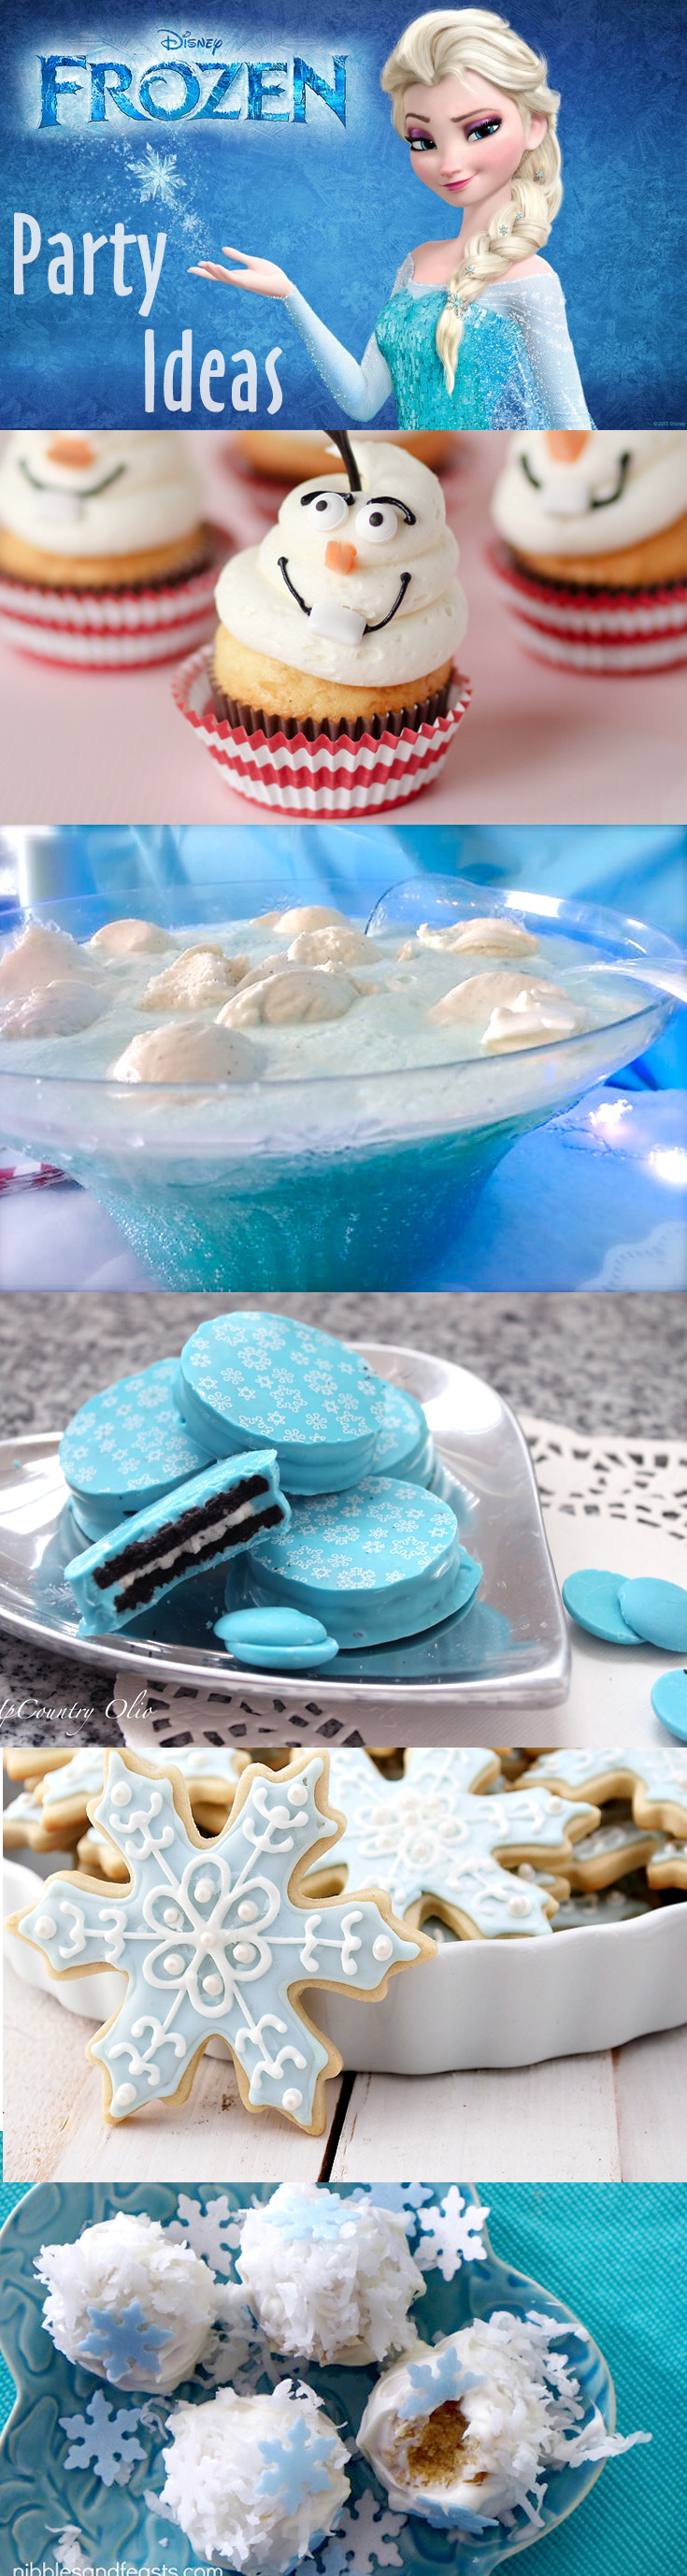 Frozen Party Food Ideas
 Throw a Disney Frozen Themed Party